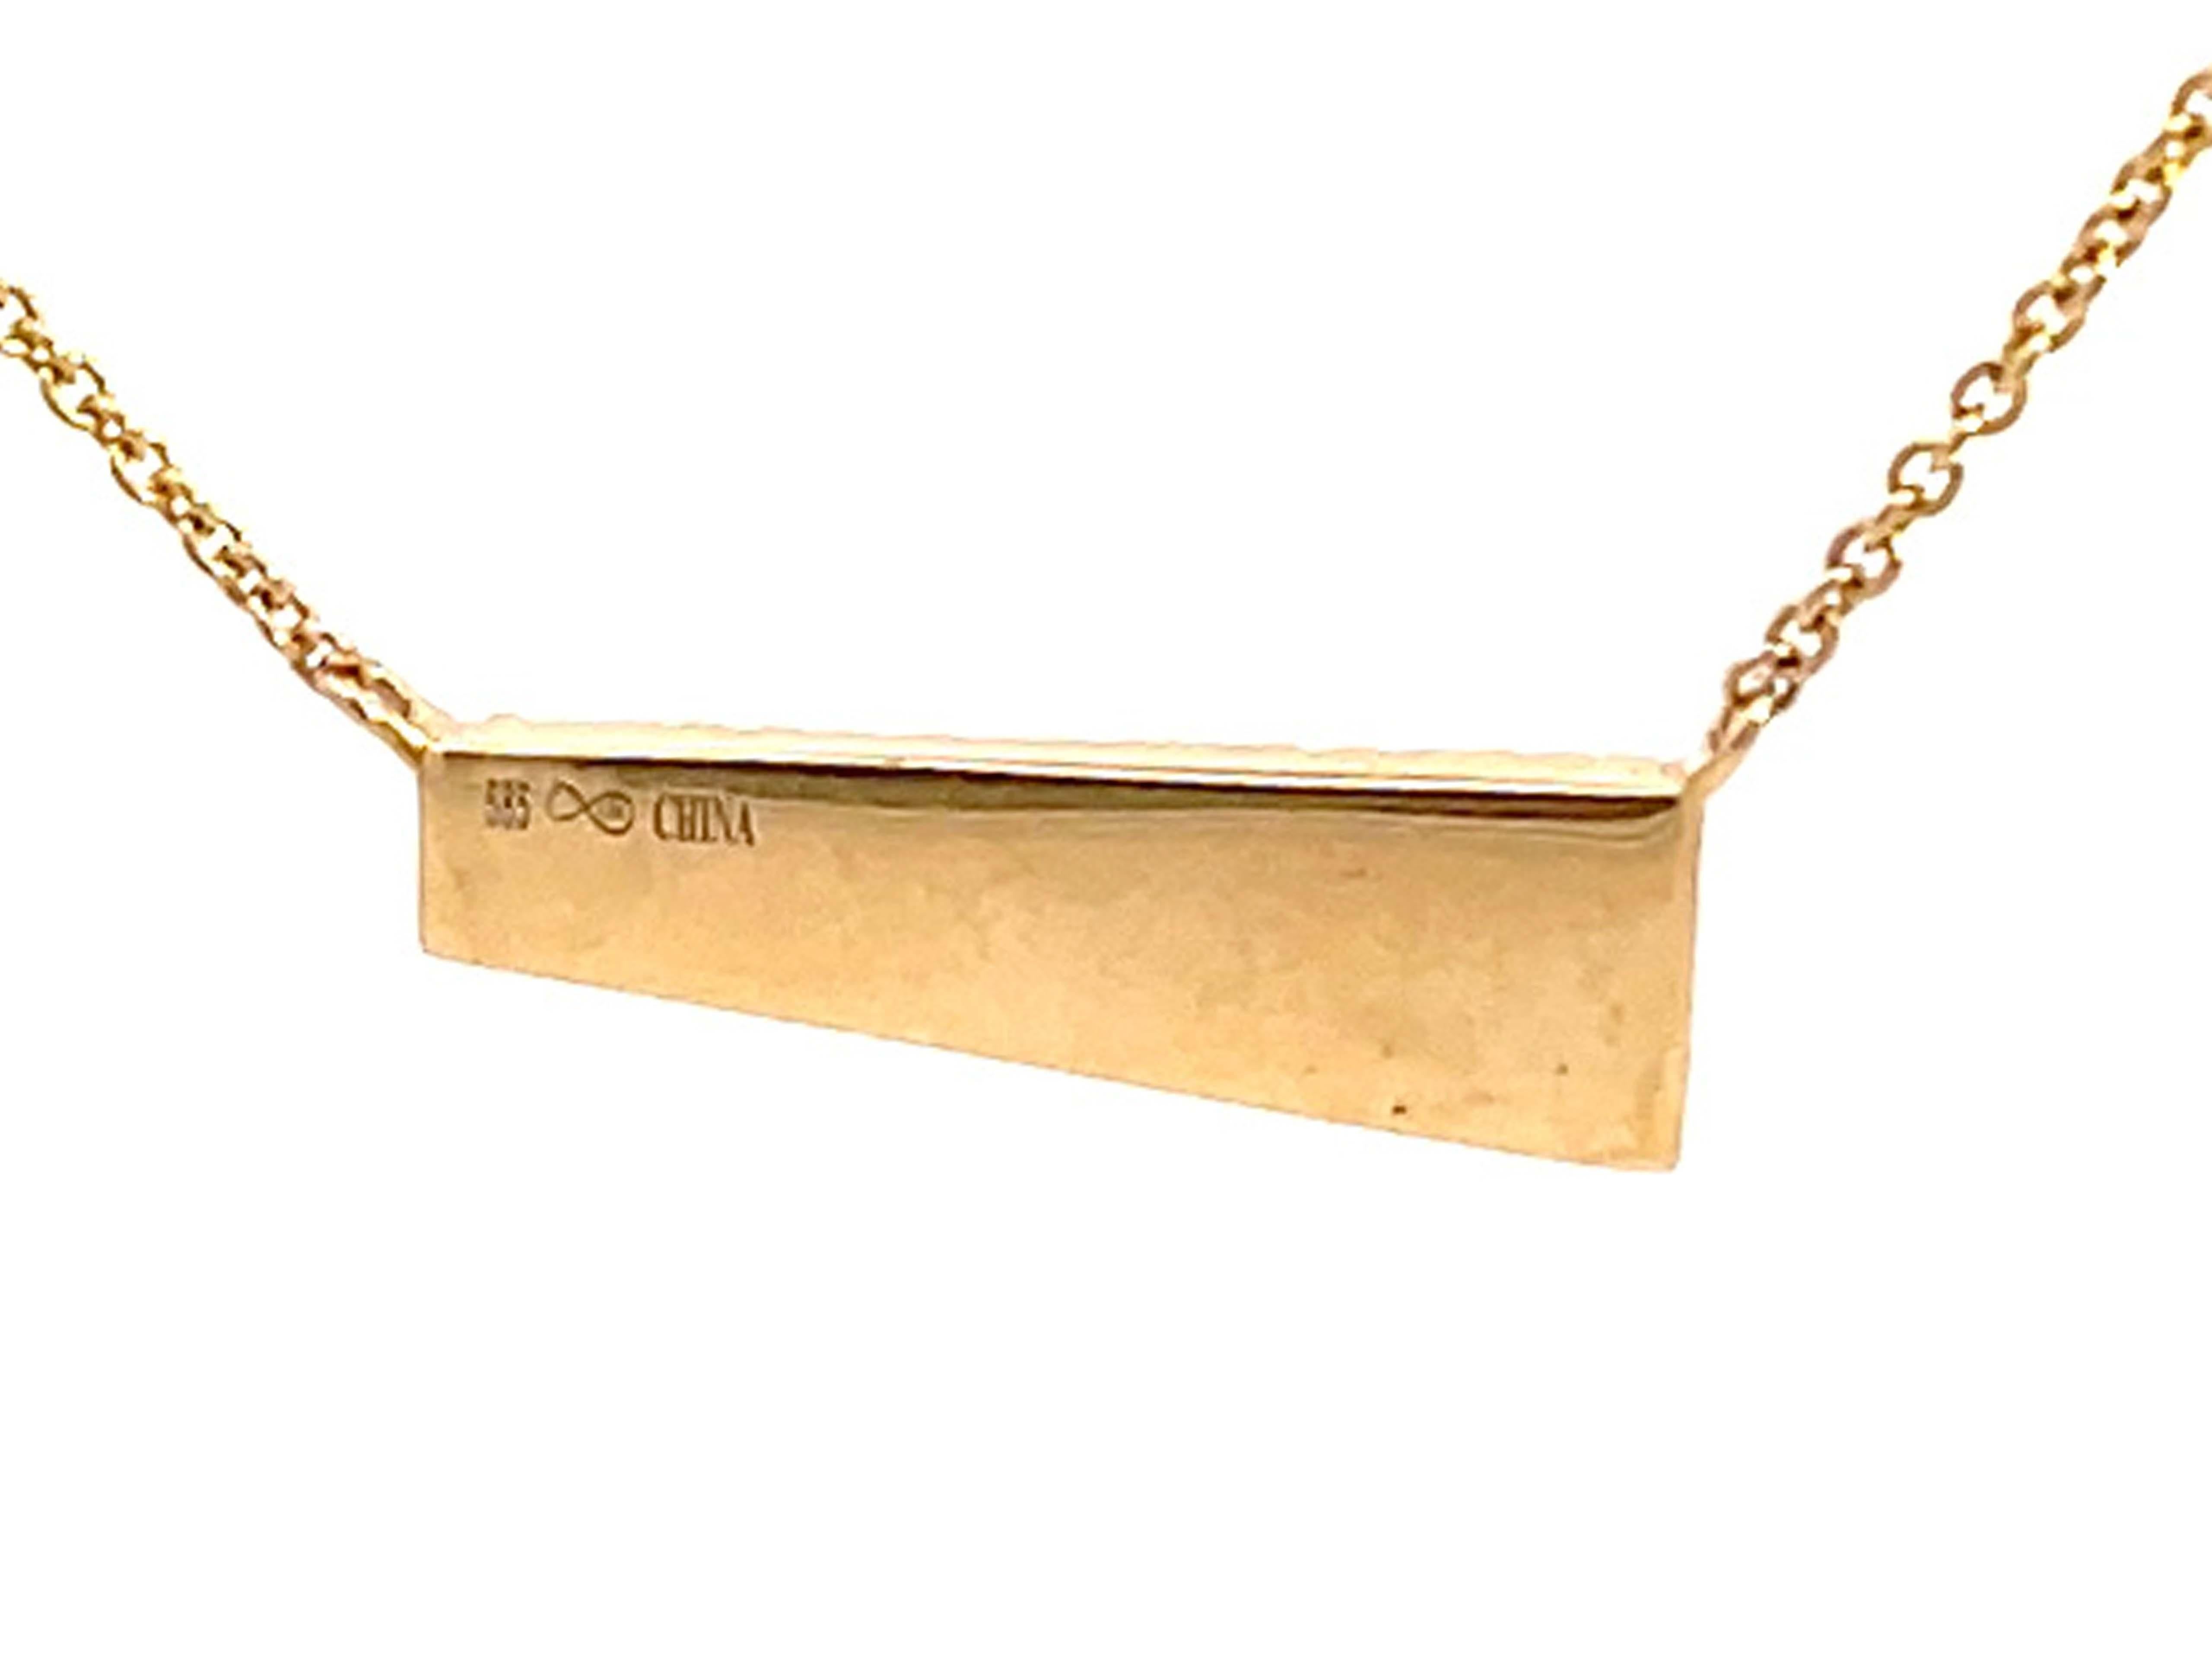 Brilliant Cut Diamond Bar Necklace in 14k Yellow Gold For Sale